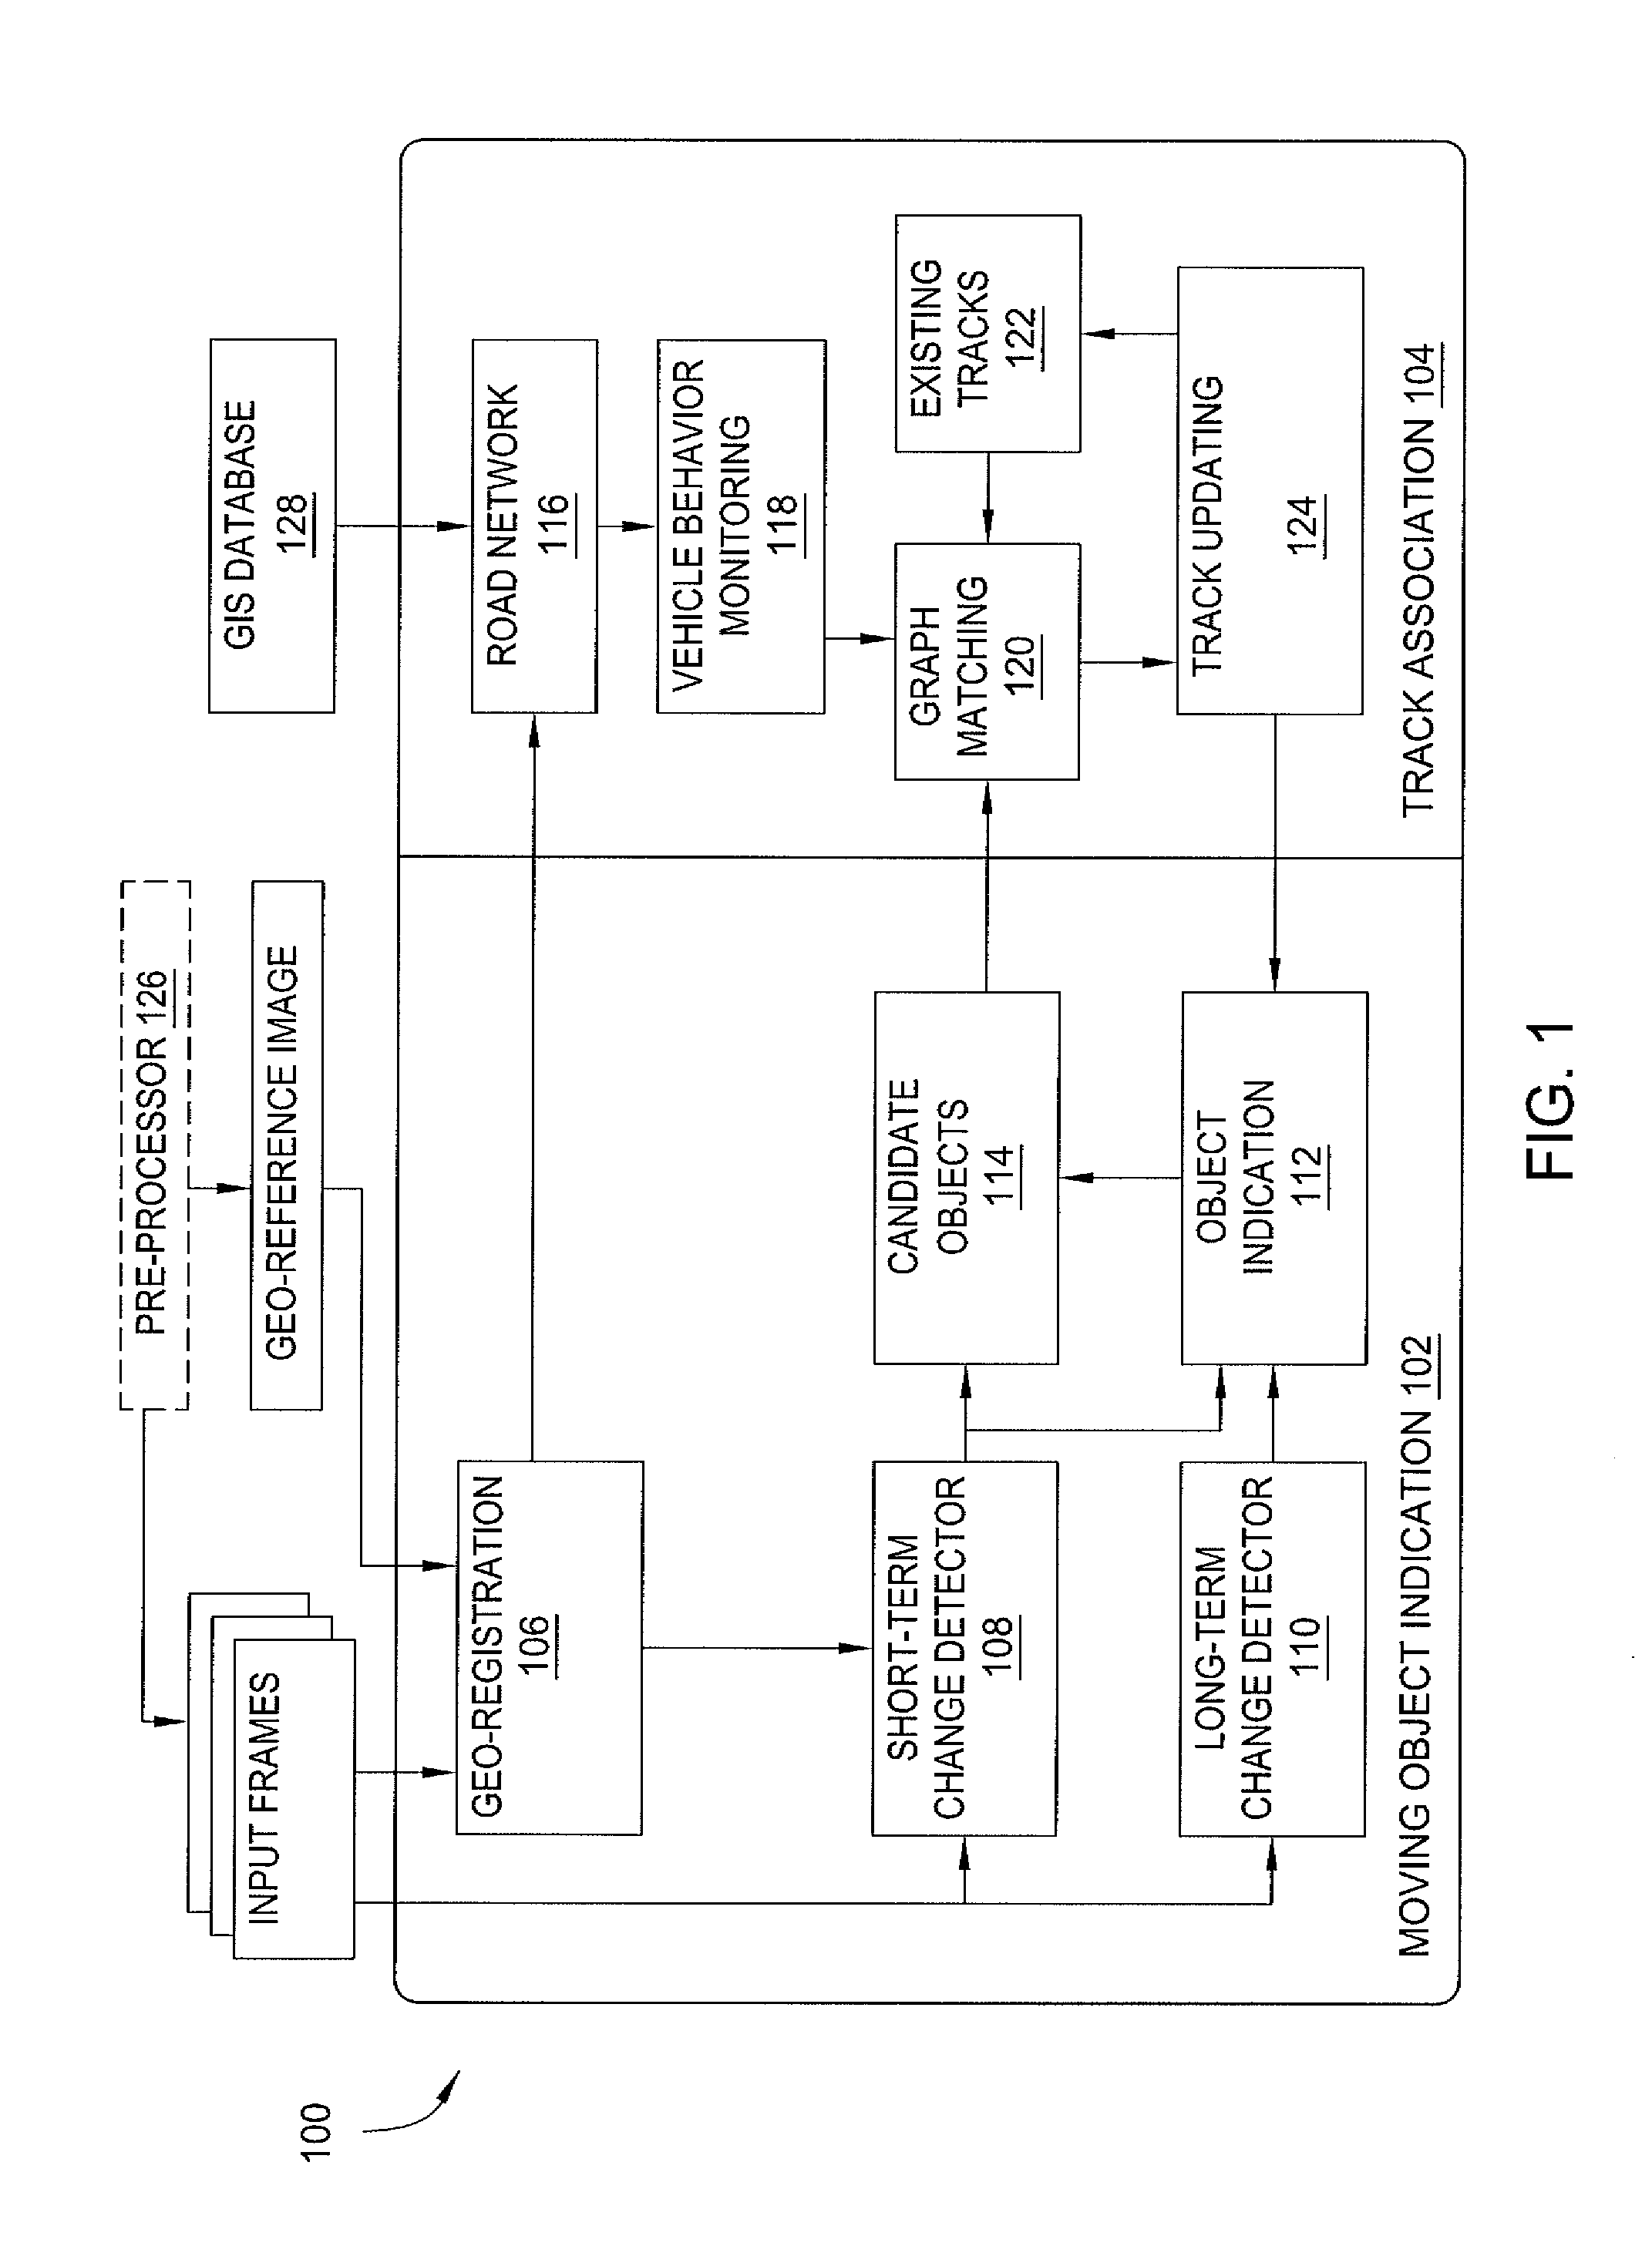 Method and apparatus for detecting and tracking vehicles